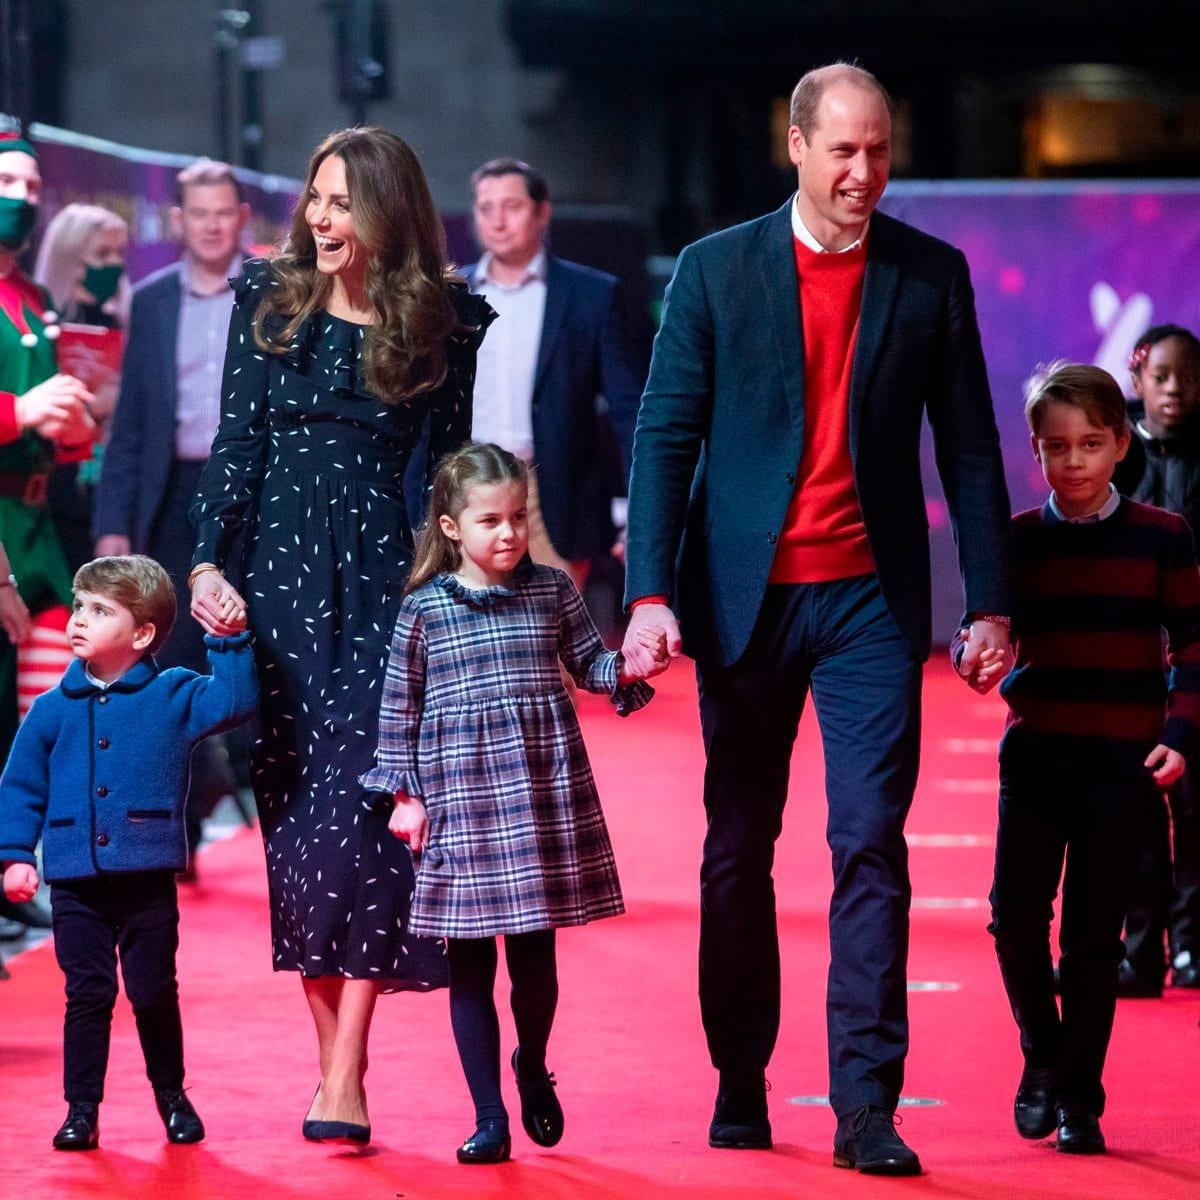 The Duchess of Cambridge exuded sophistication in an Alessandra Rich dress, while Princess Charlotte sported an adorable tartan dress and tights. Louis wore his big brother's blue Amaia Kids jacket. Prince George looked all grown up wearing a red and navy striped sweater and trousers.